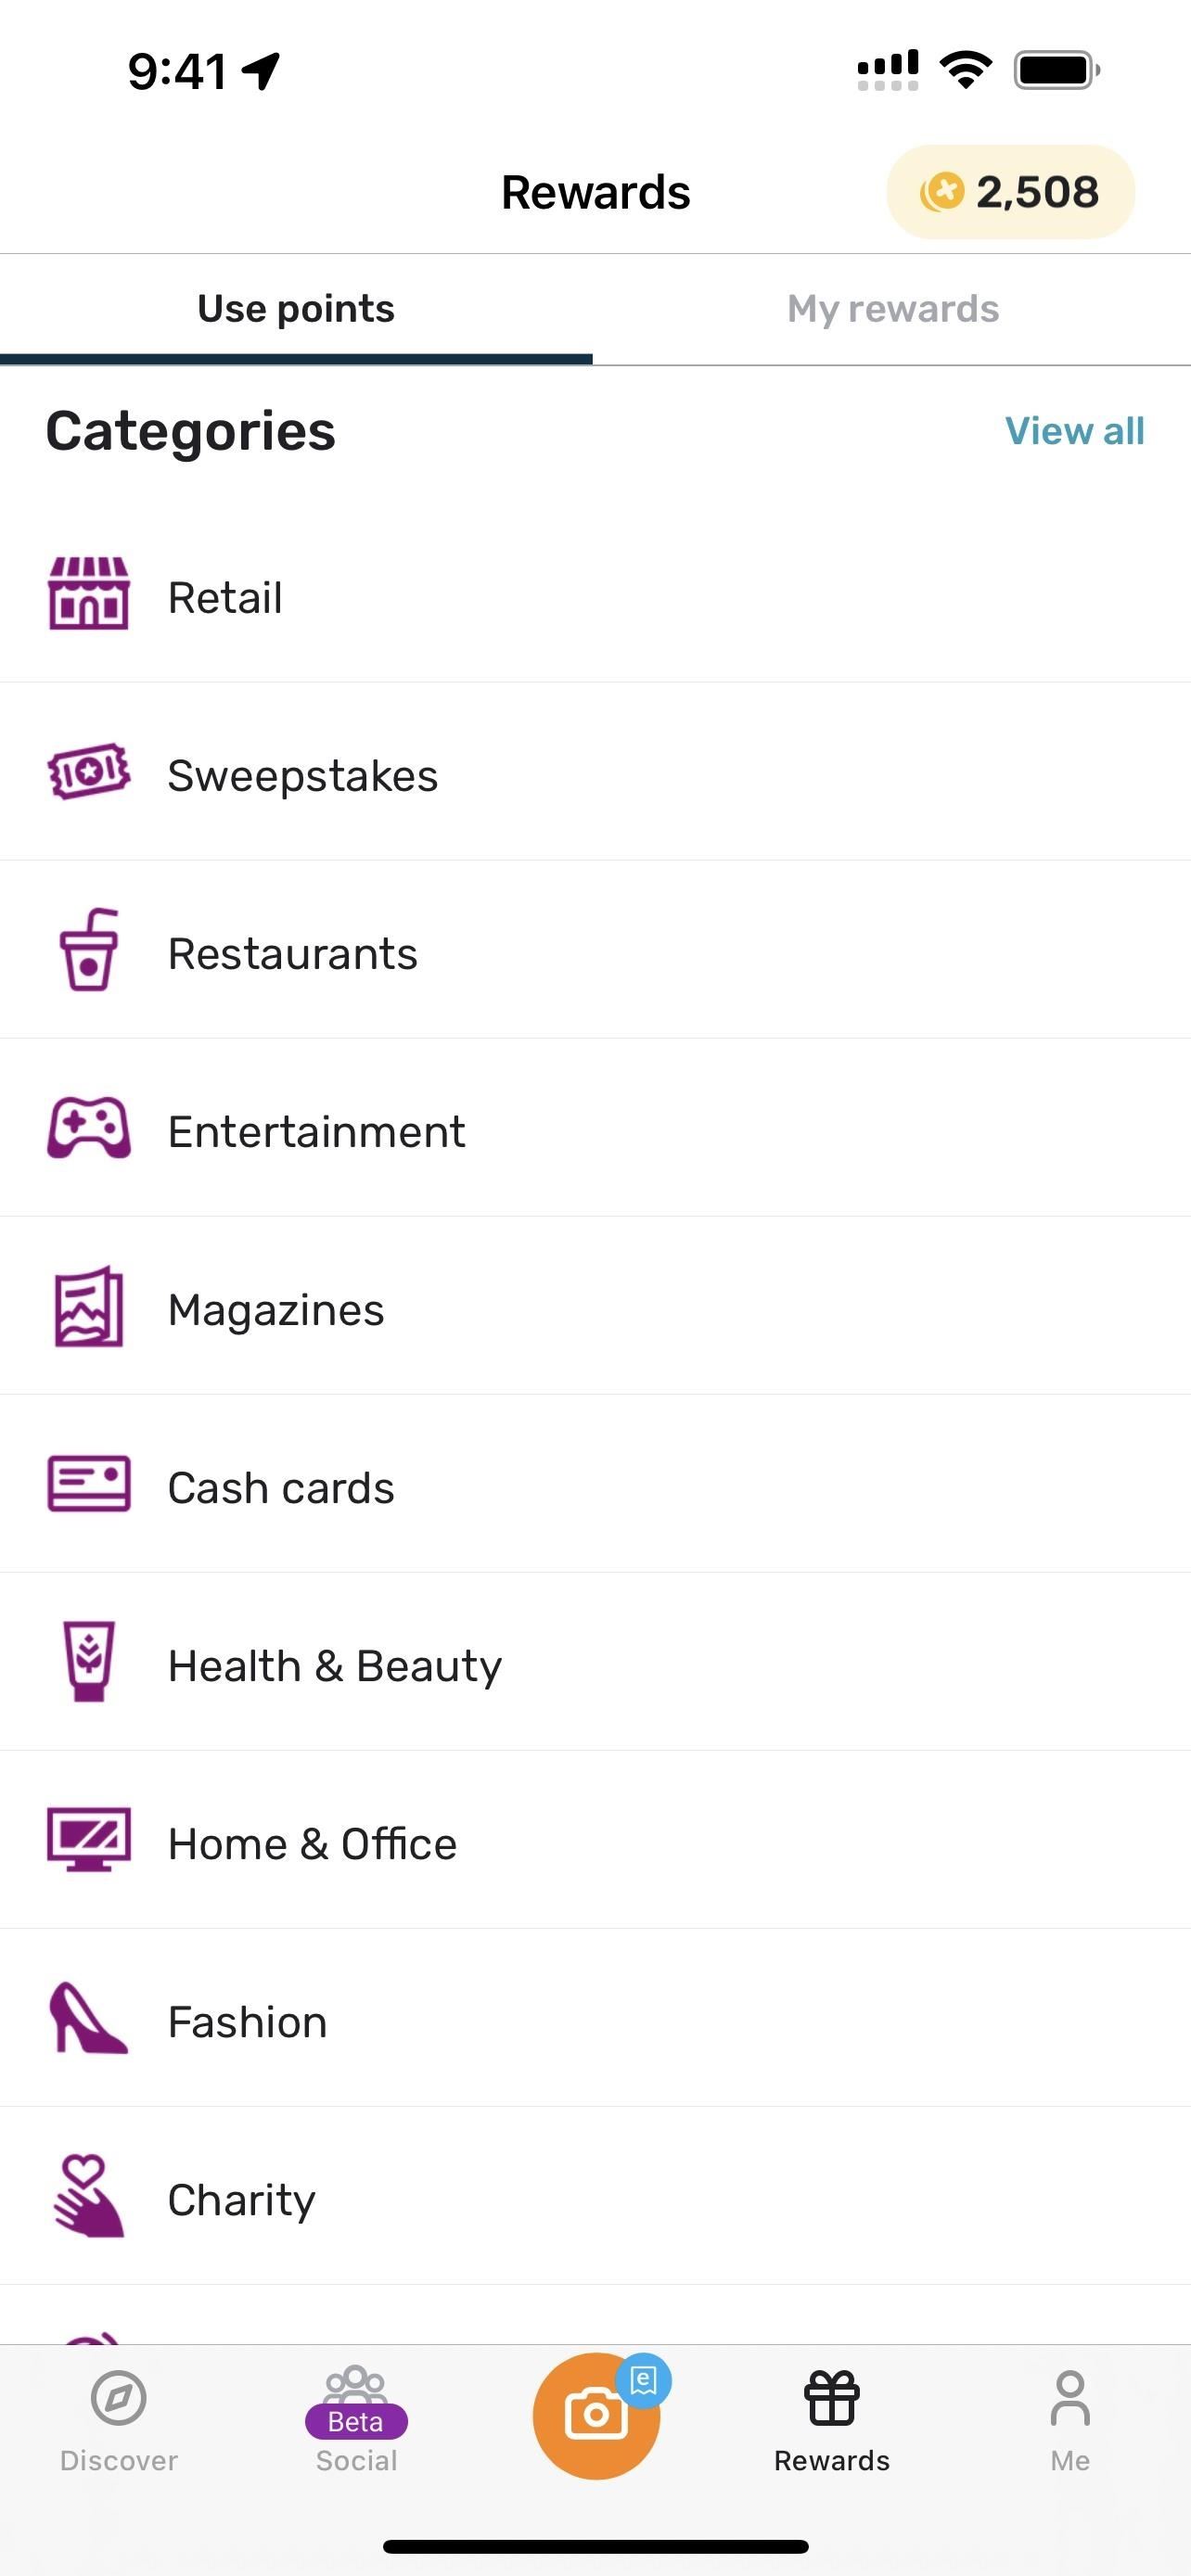 How to Earn Free Money, Stocks, Crypto, Gift Cards, and Other Cash Rewards on Your iPhone